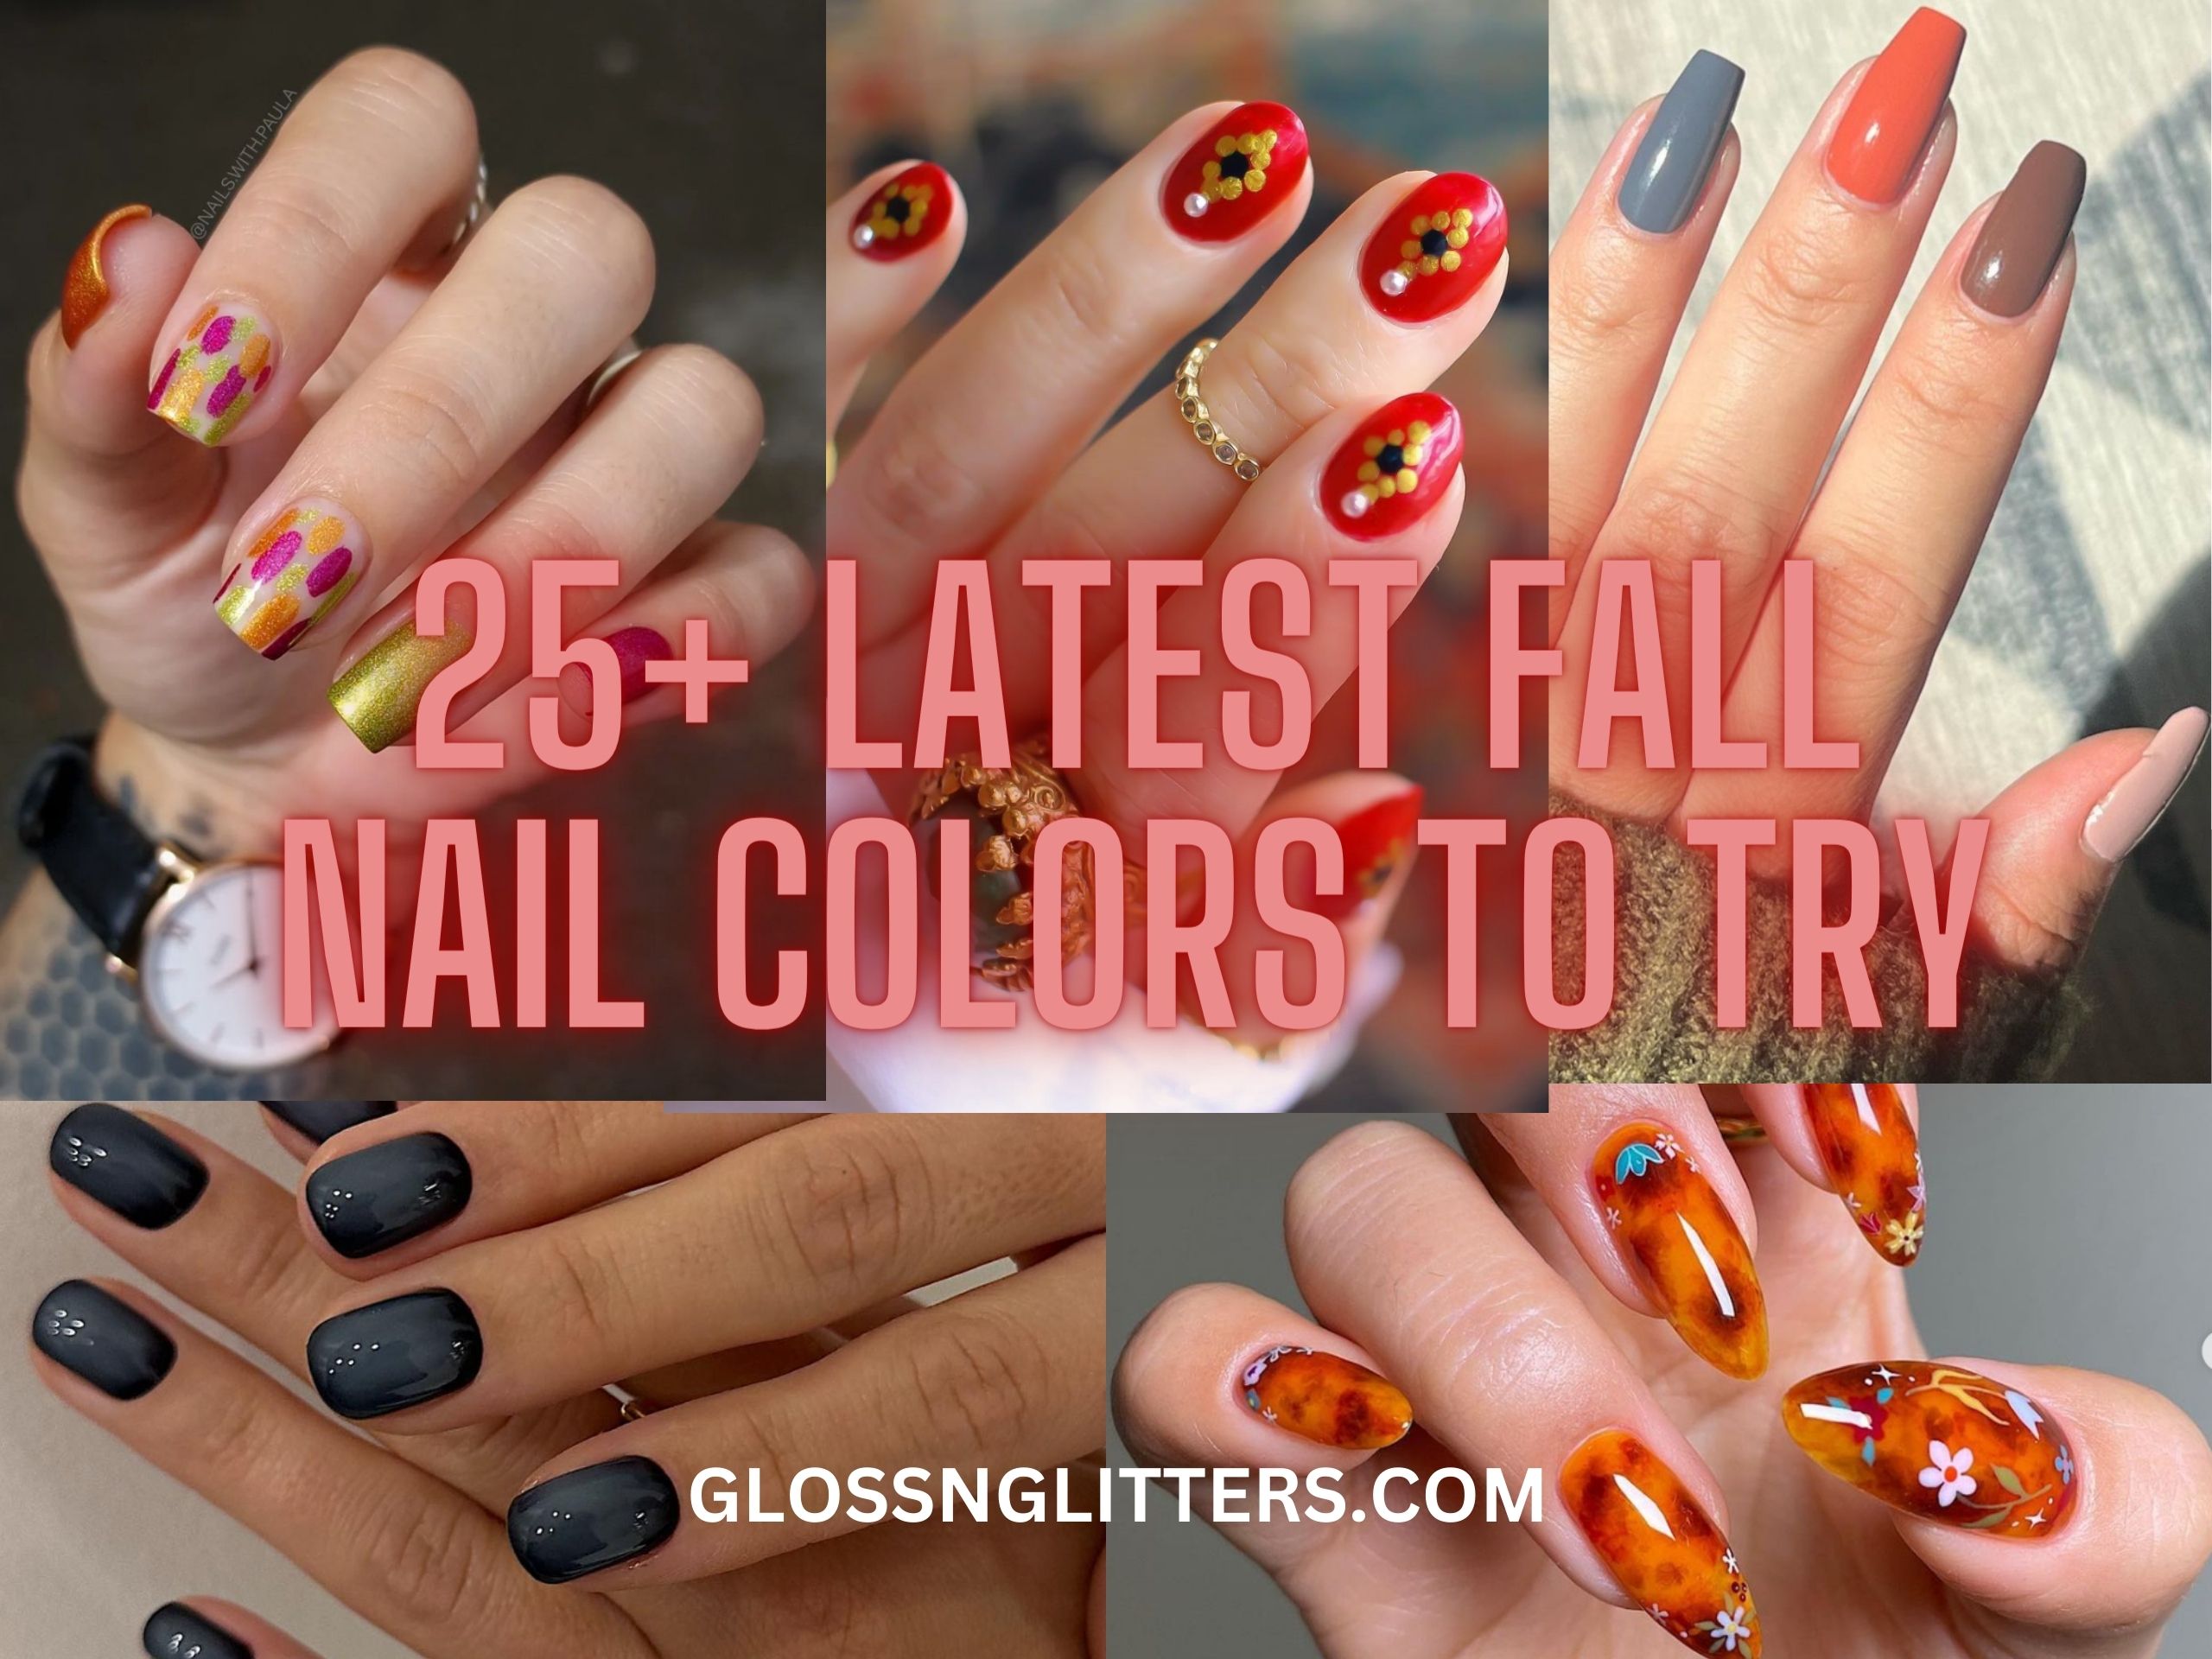 The 10 Most Popular Nail Polish Colors of Fall 2022 | Nail polish colors, Fall  nail colors, Best nail polish